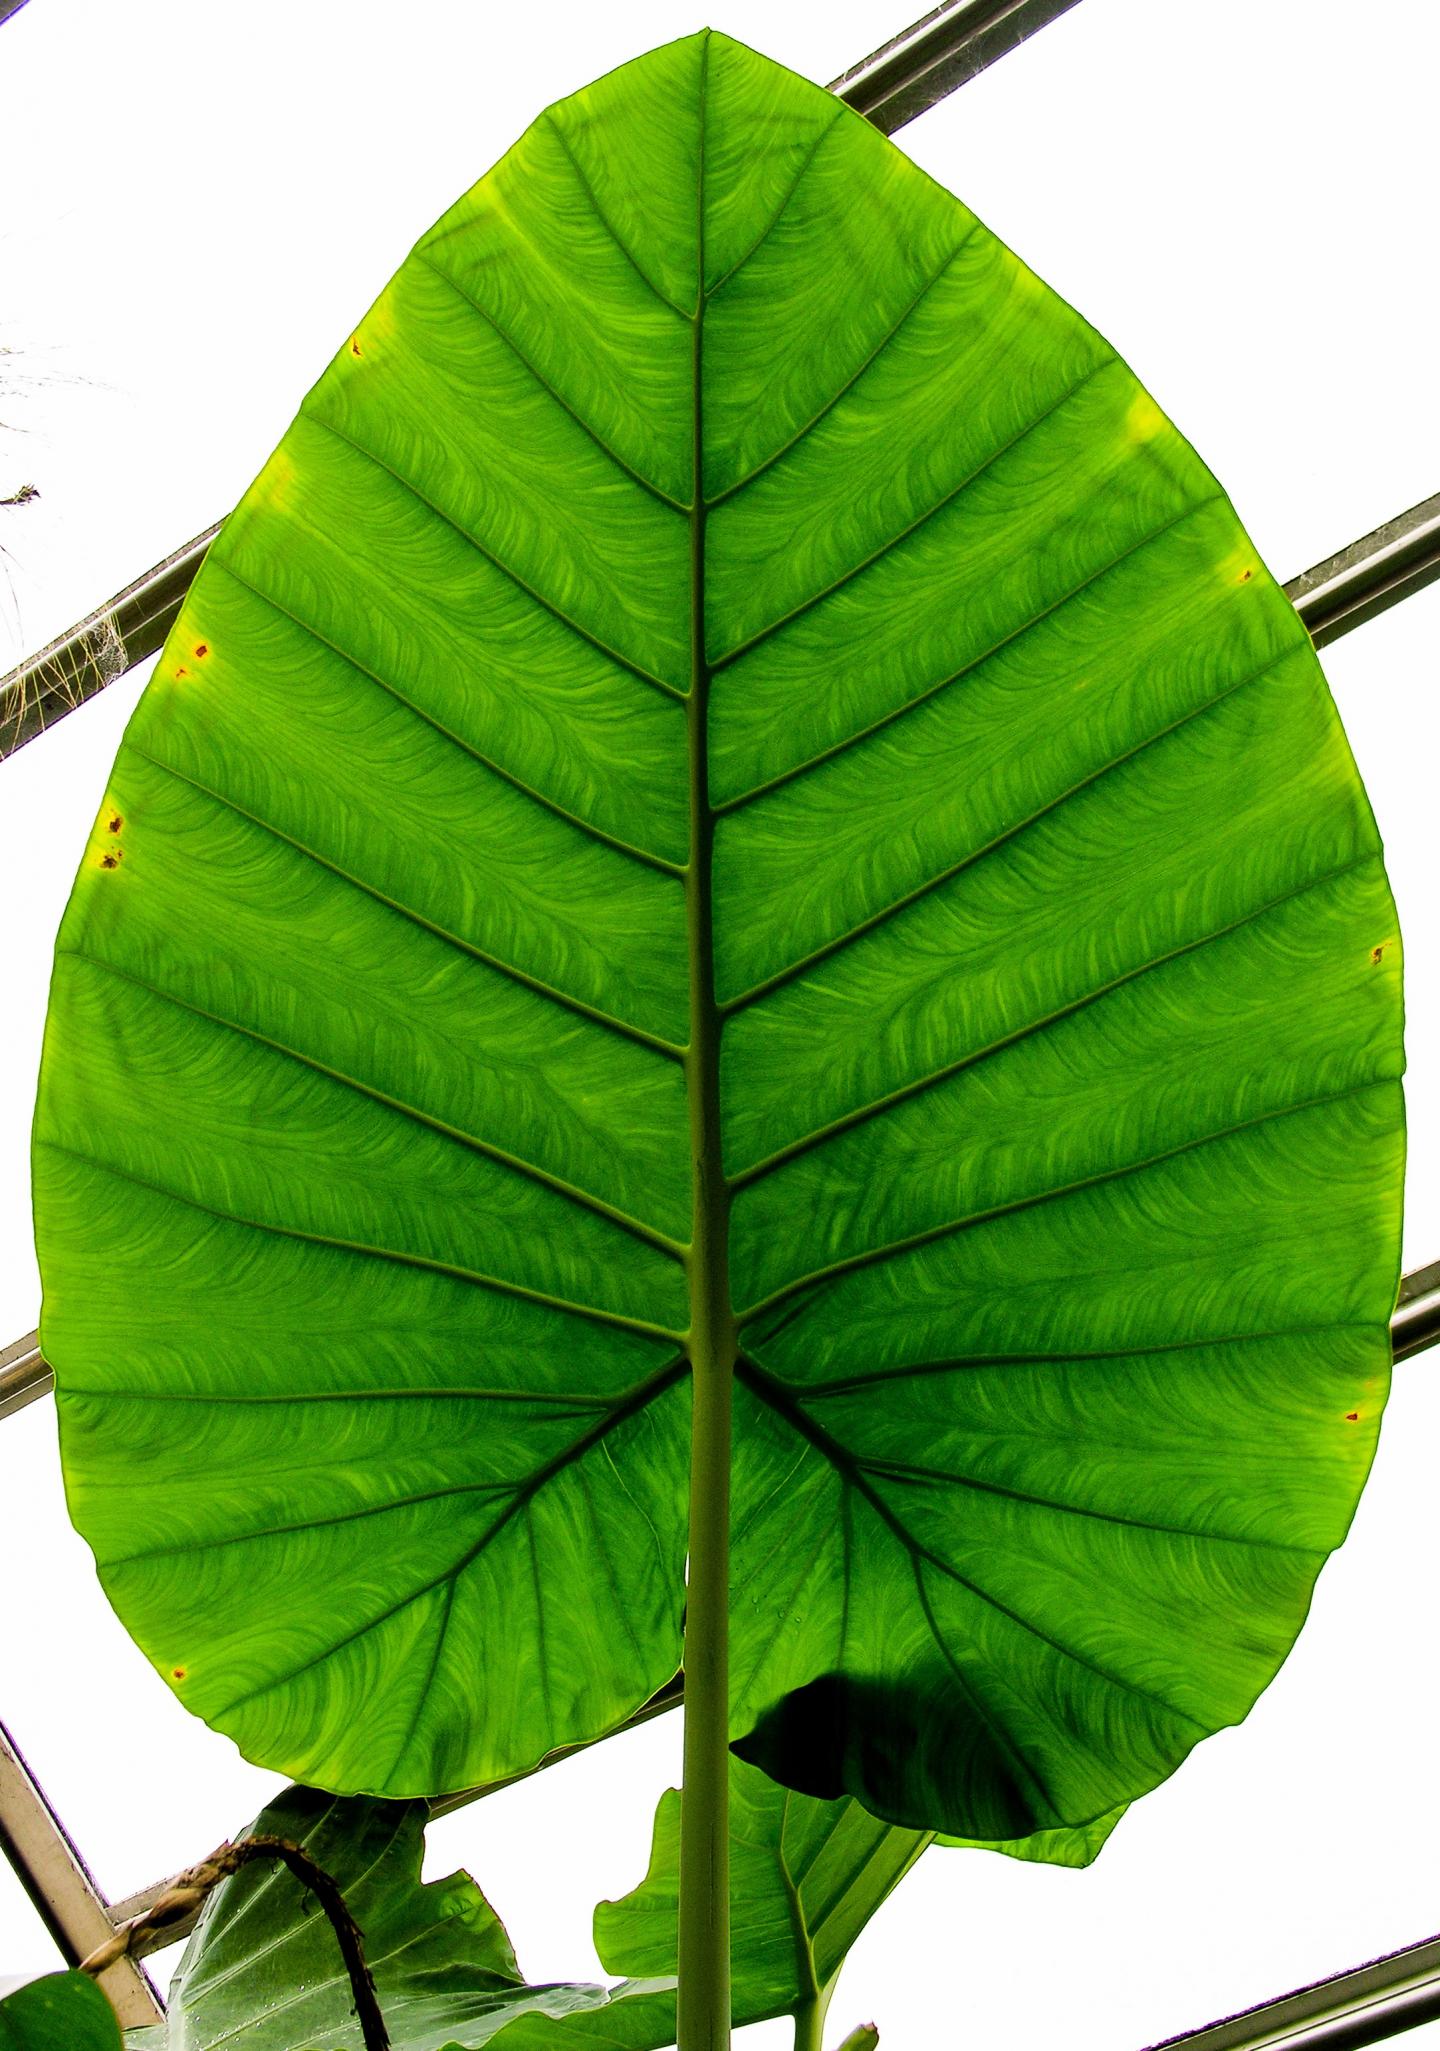 Day and Night Temperature Differences Influence Global Patterns in Leaf Size